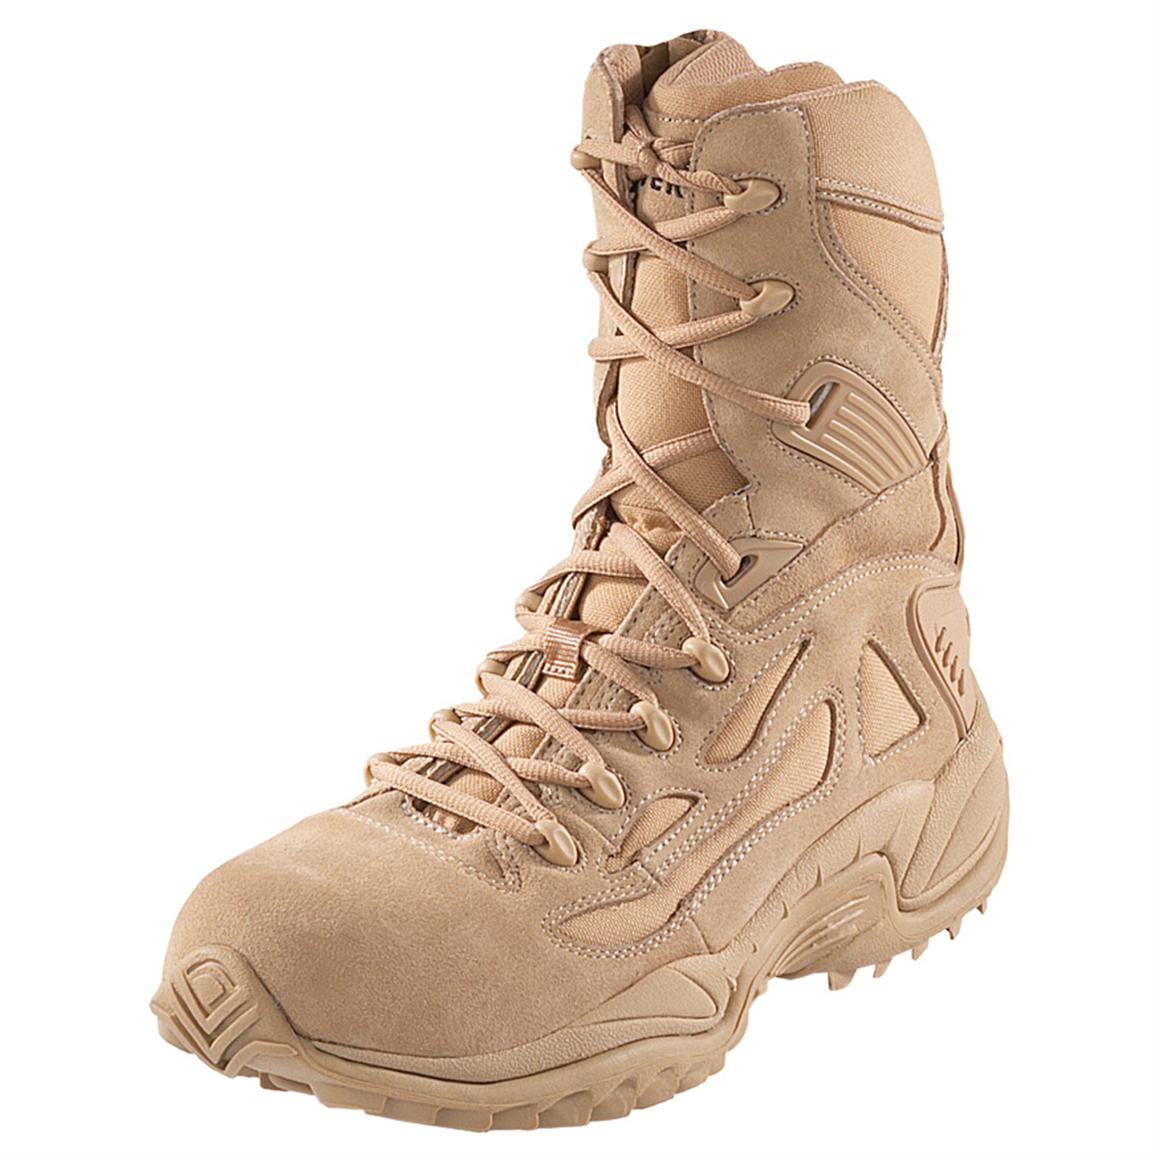 Women's Converse® Composite Safety Toe Stealth S.W.A.T. Boots, Desert ...